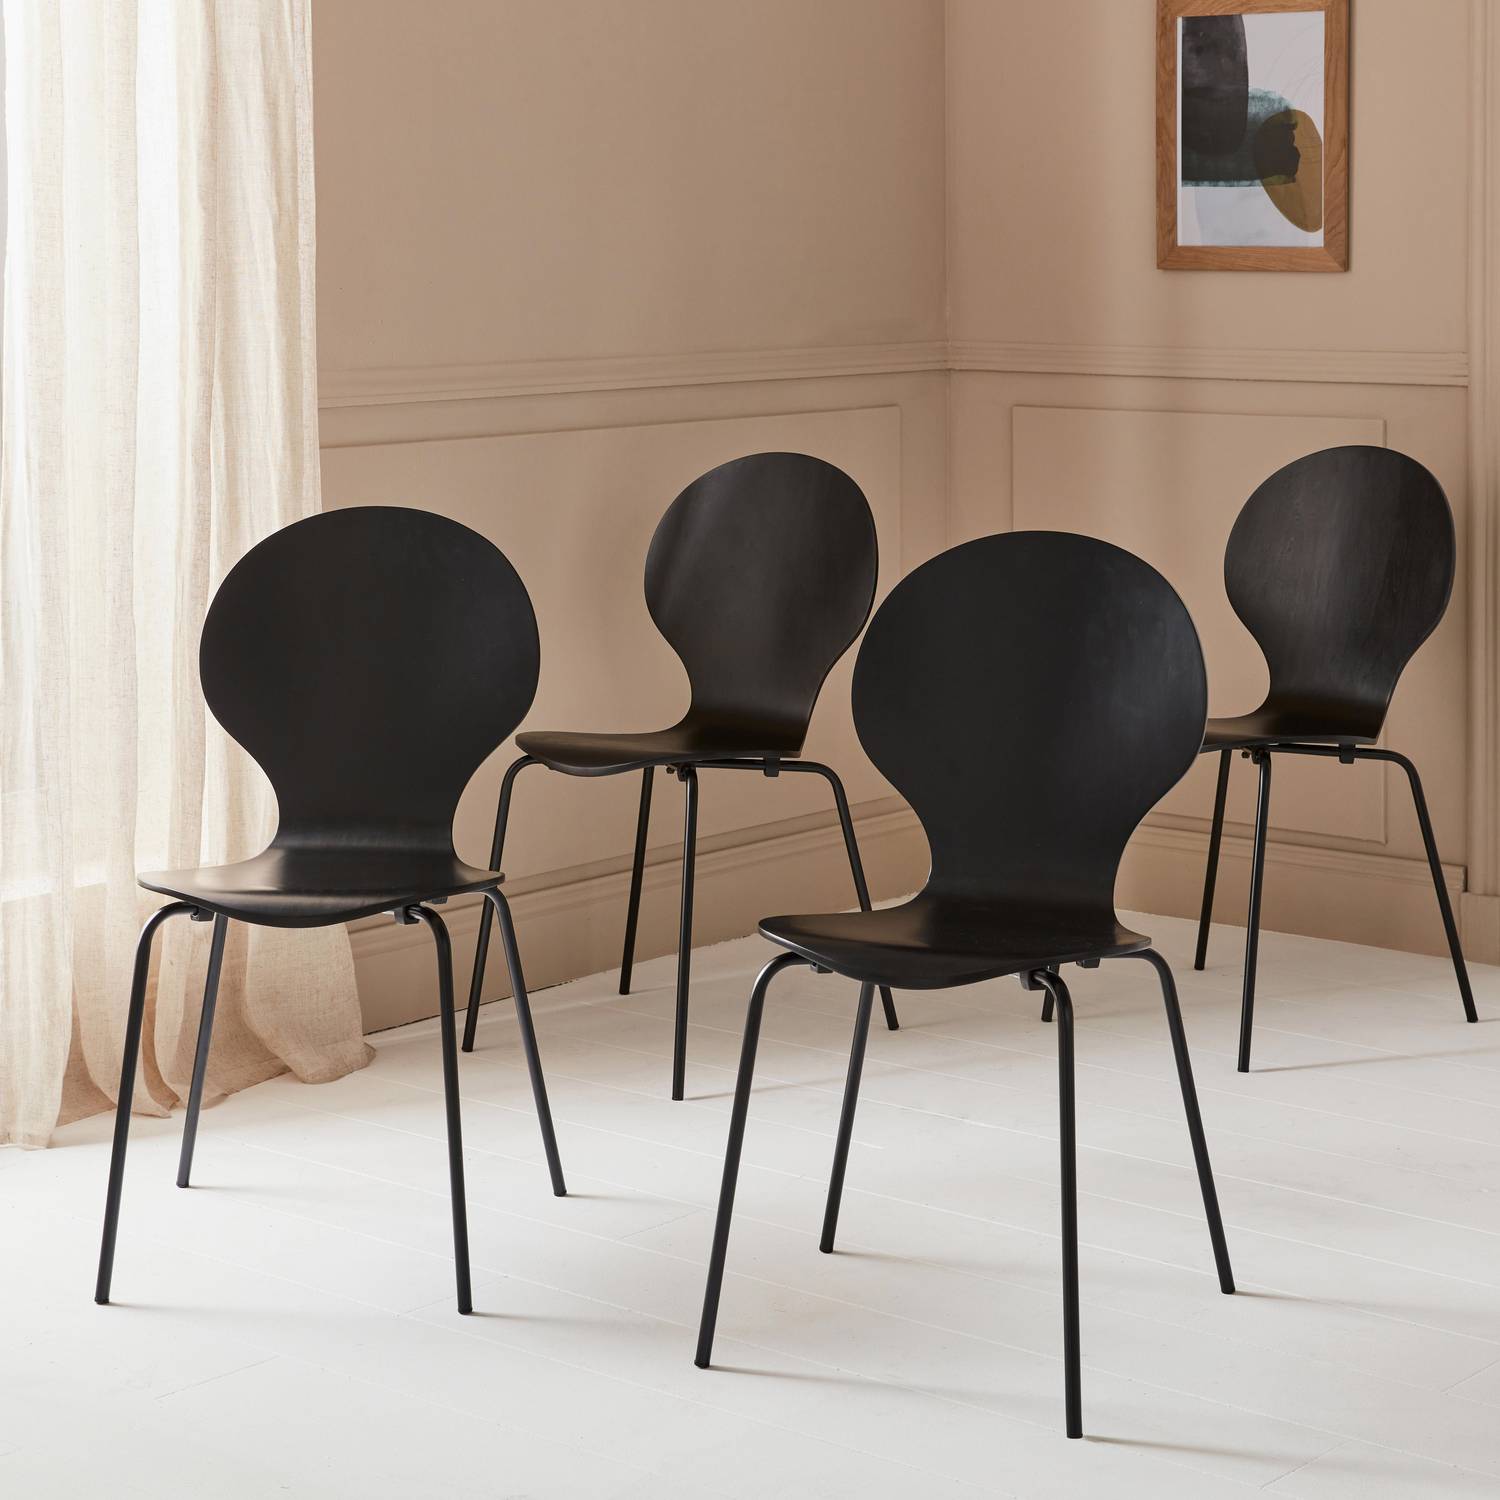 Set of 4 stackable Retro Chairs, Wood and Plywood, black,  L43 x W48 x H87cm Photo2